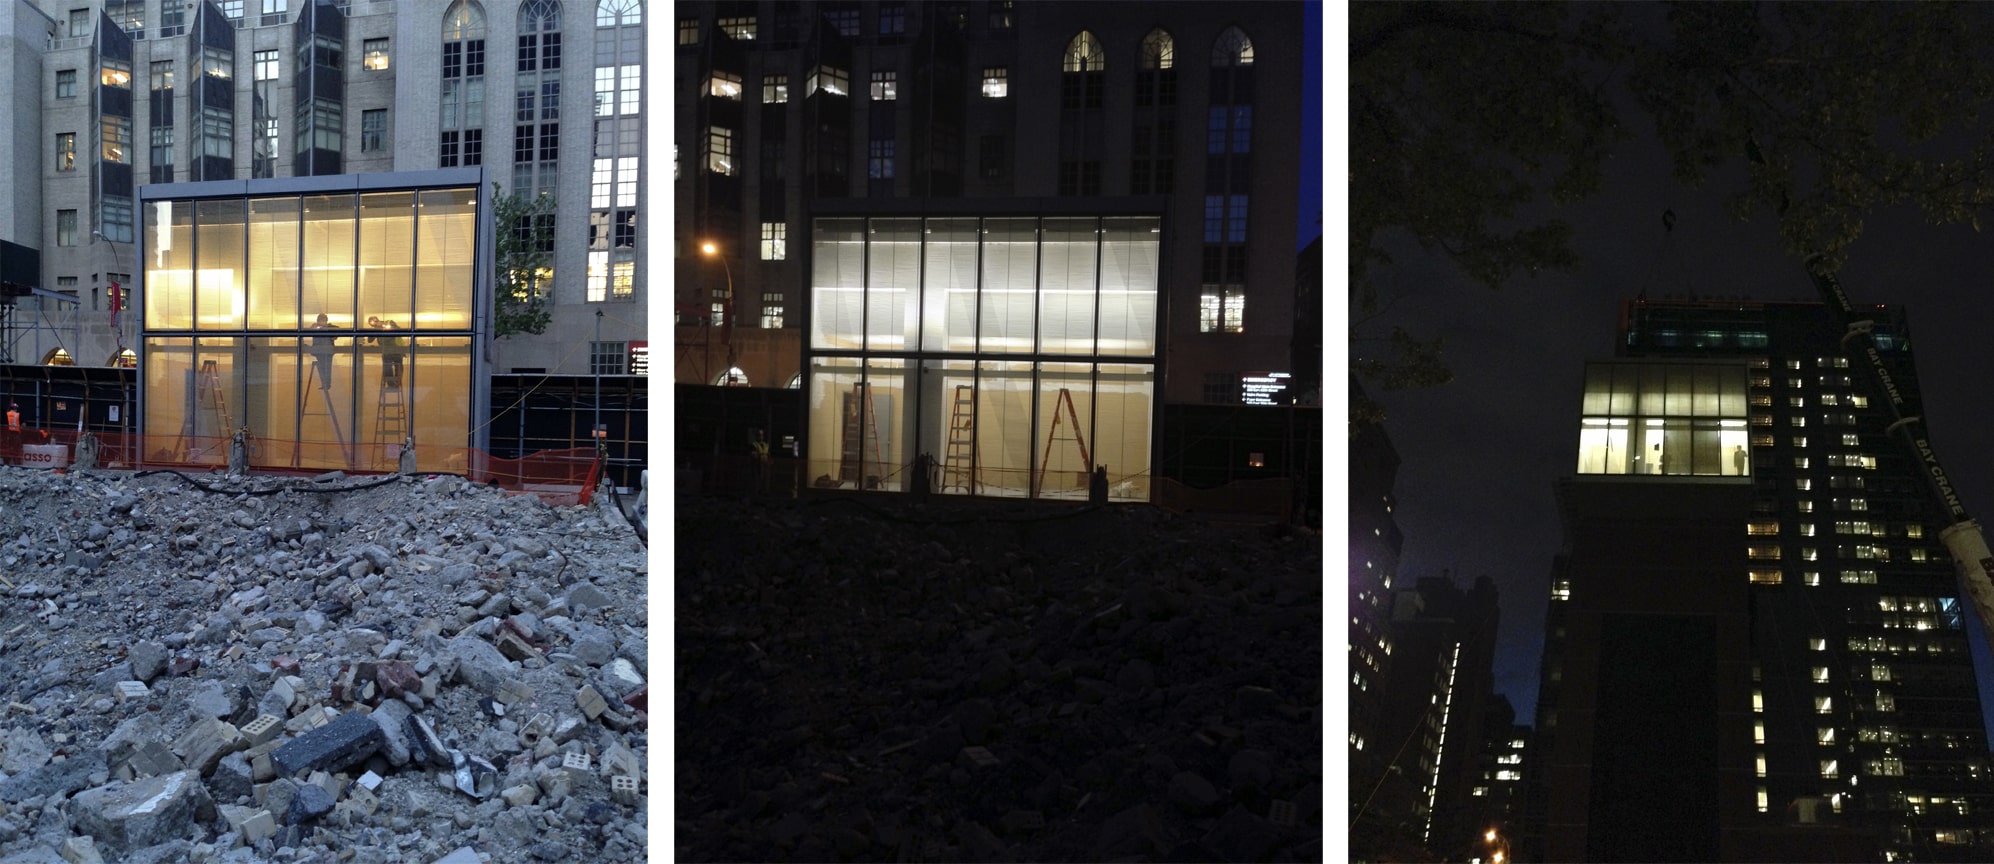 Lighting a New Ambulatory Care Center in NYC